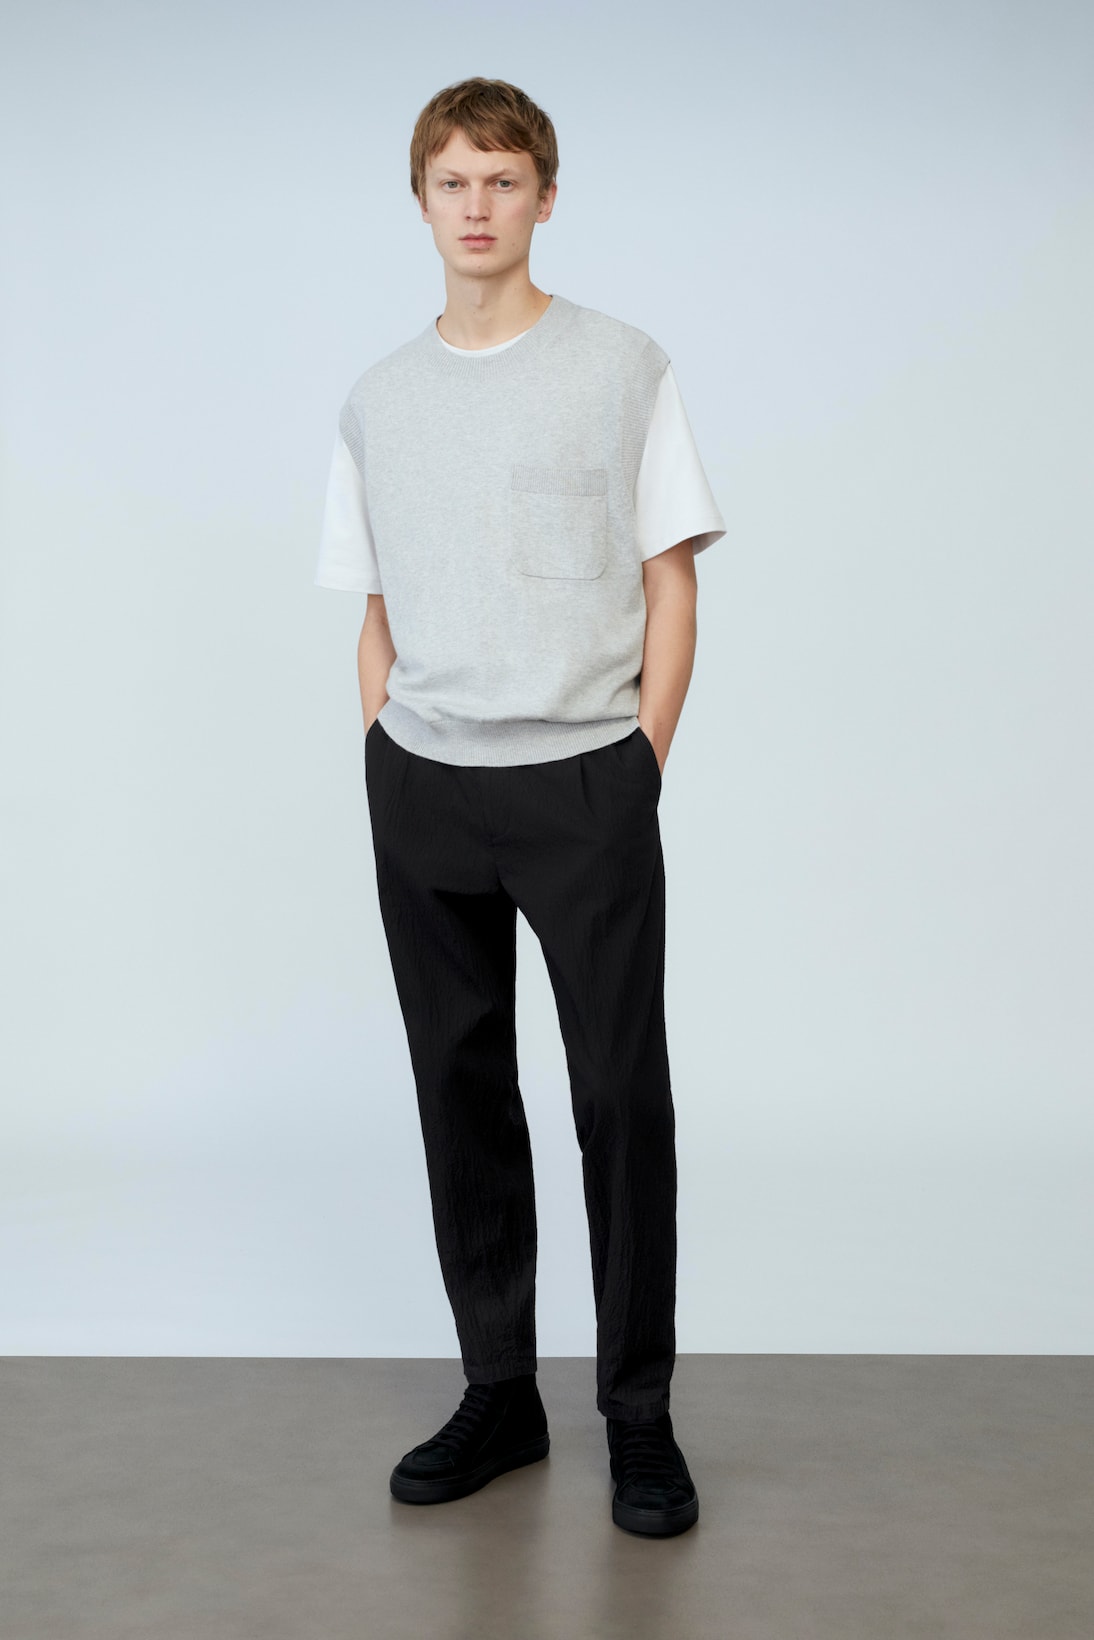 cos spring menswear summer collection lookbook gray white tee t shirt pants black shoes